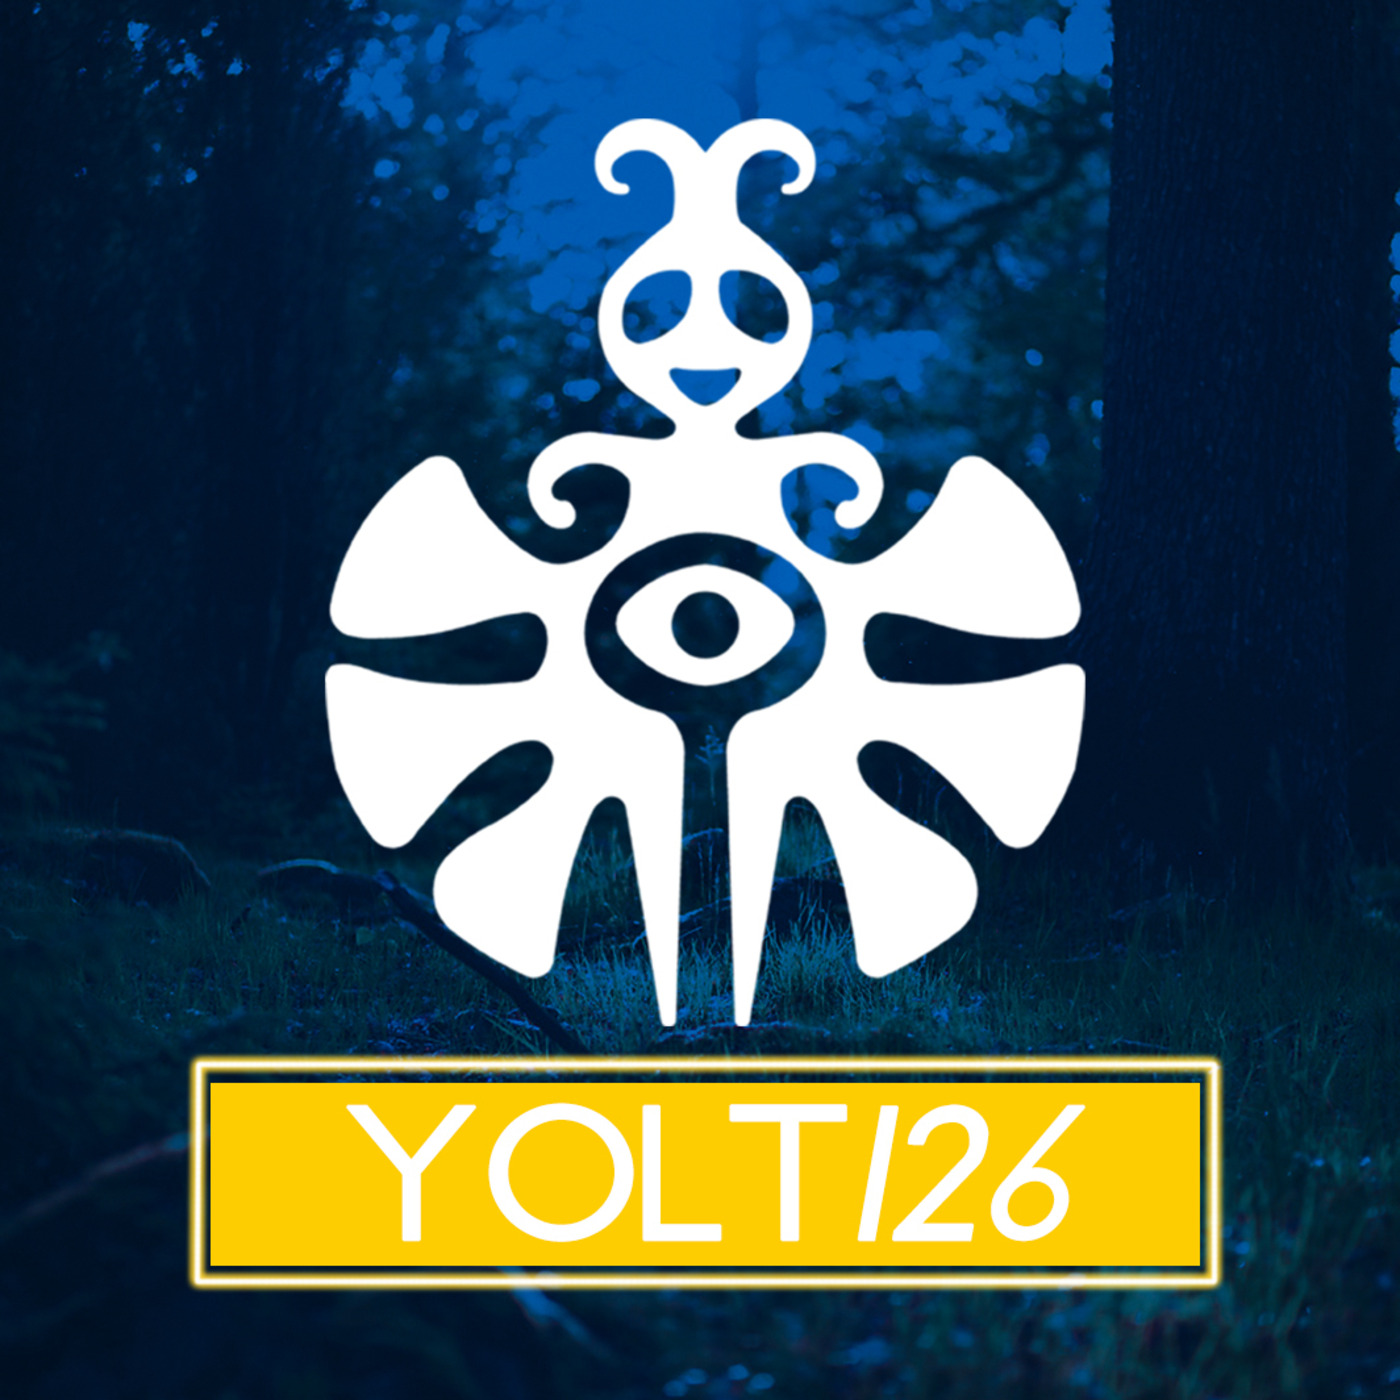 You Only Live Trance Episode 126 (#YOLT126) - Ness